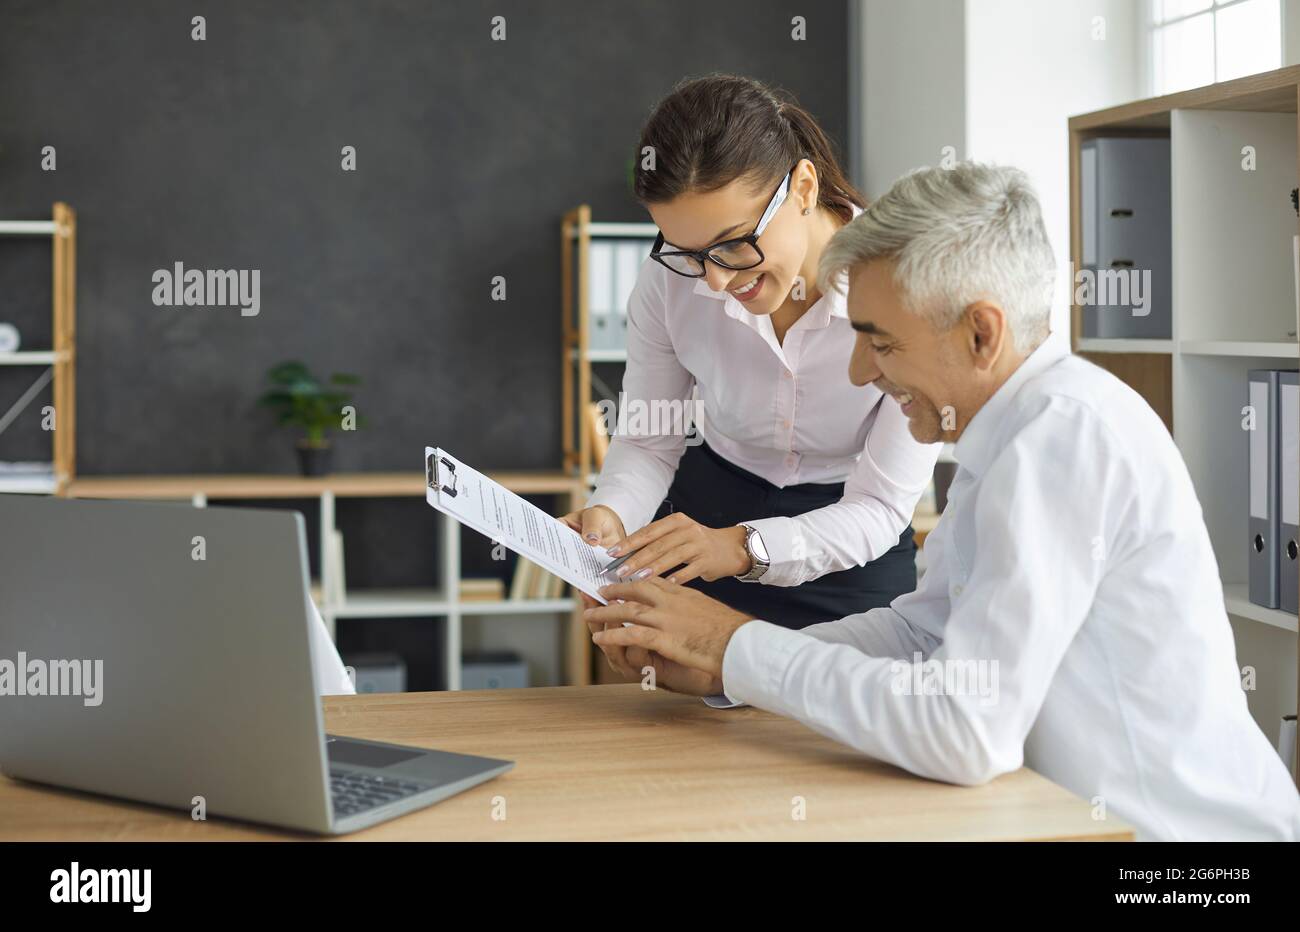 Smiling female secretary gives her senior manager paper documents or a contract to sign. Stock Photo